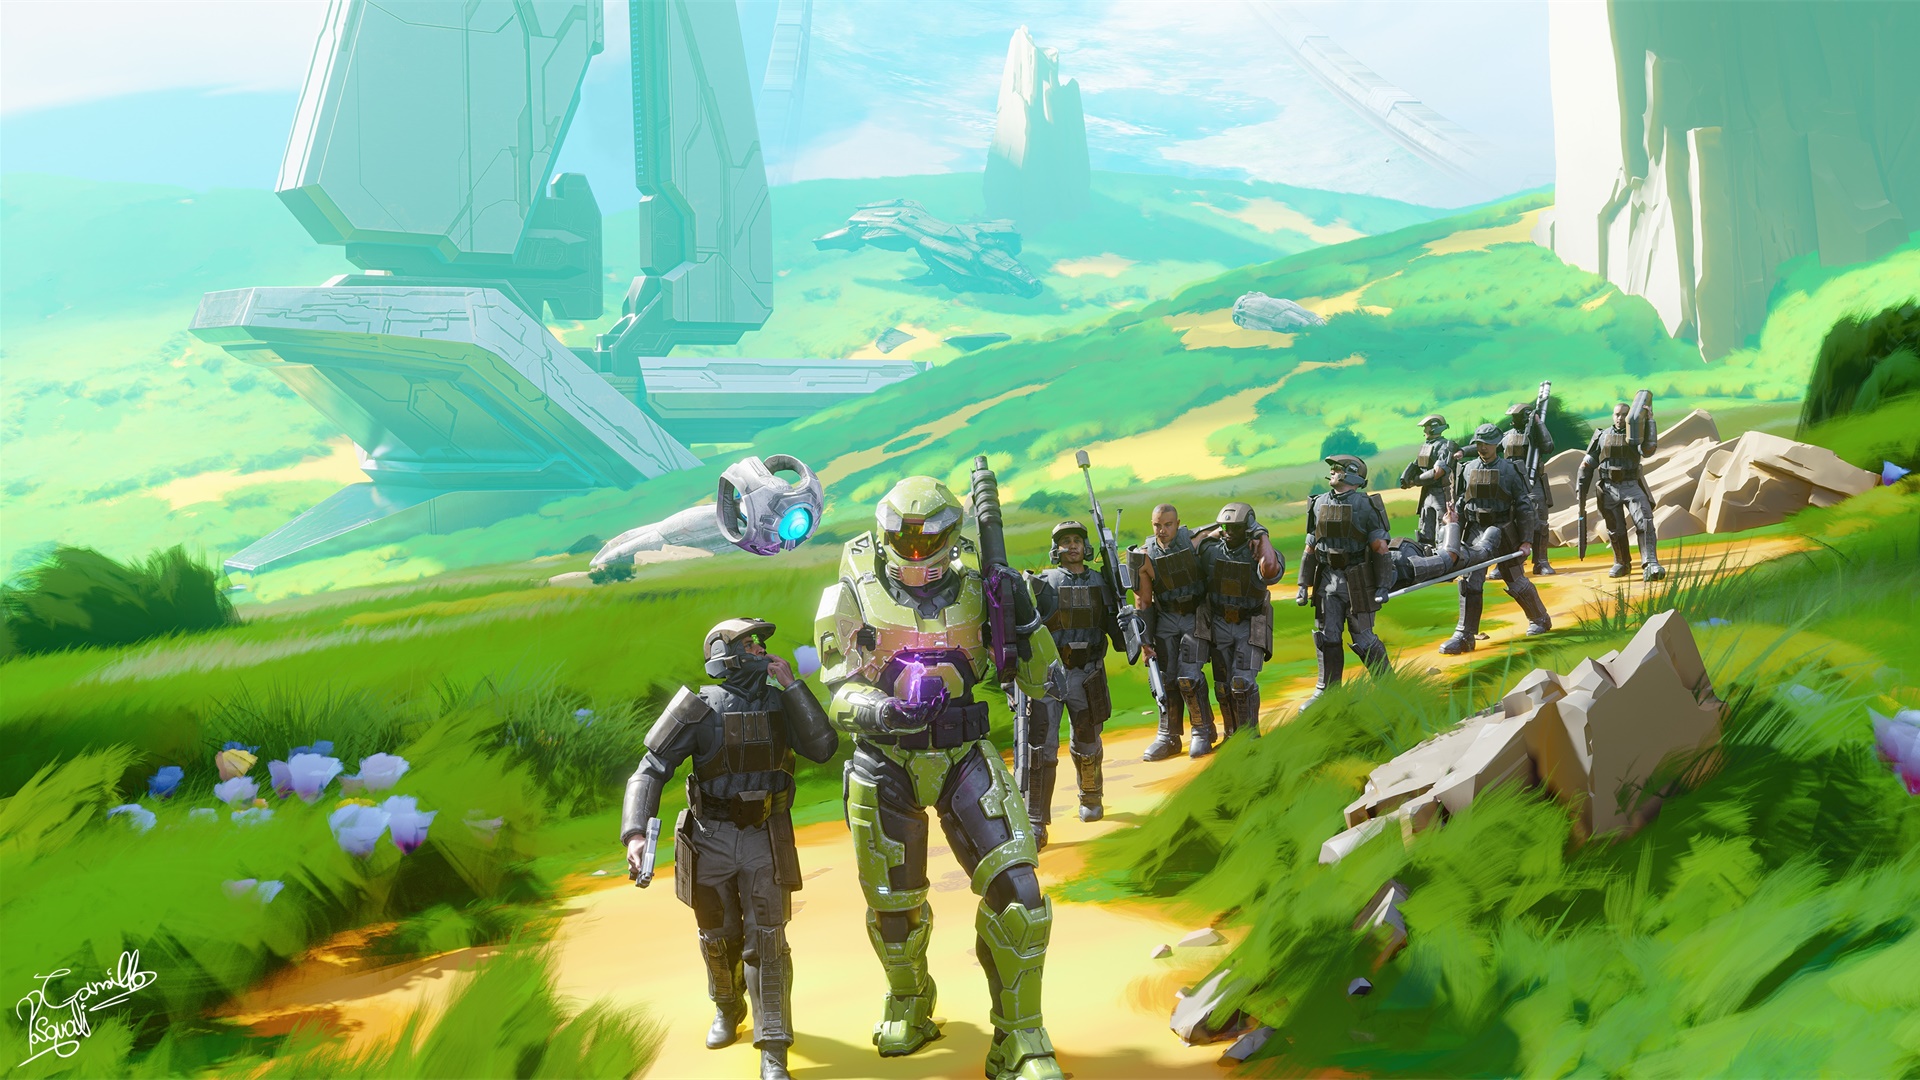 November Spotlight header image of art by millisworlds depicting the Master Chief, Cortana, 343 Guilty Spark, and a group of Marines on a grassy landscape with a Forerunner beam tower in the background